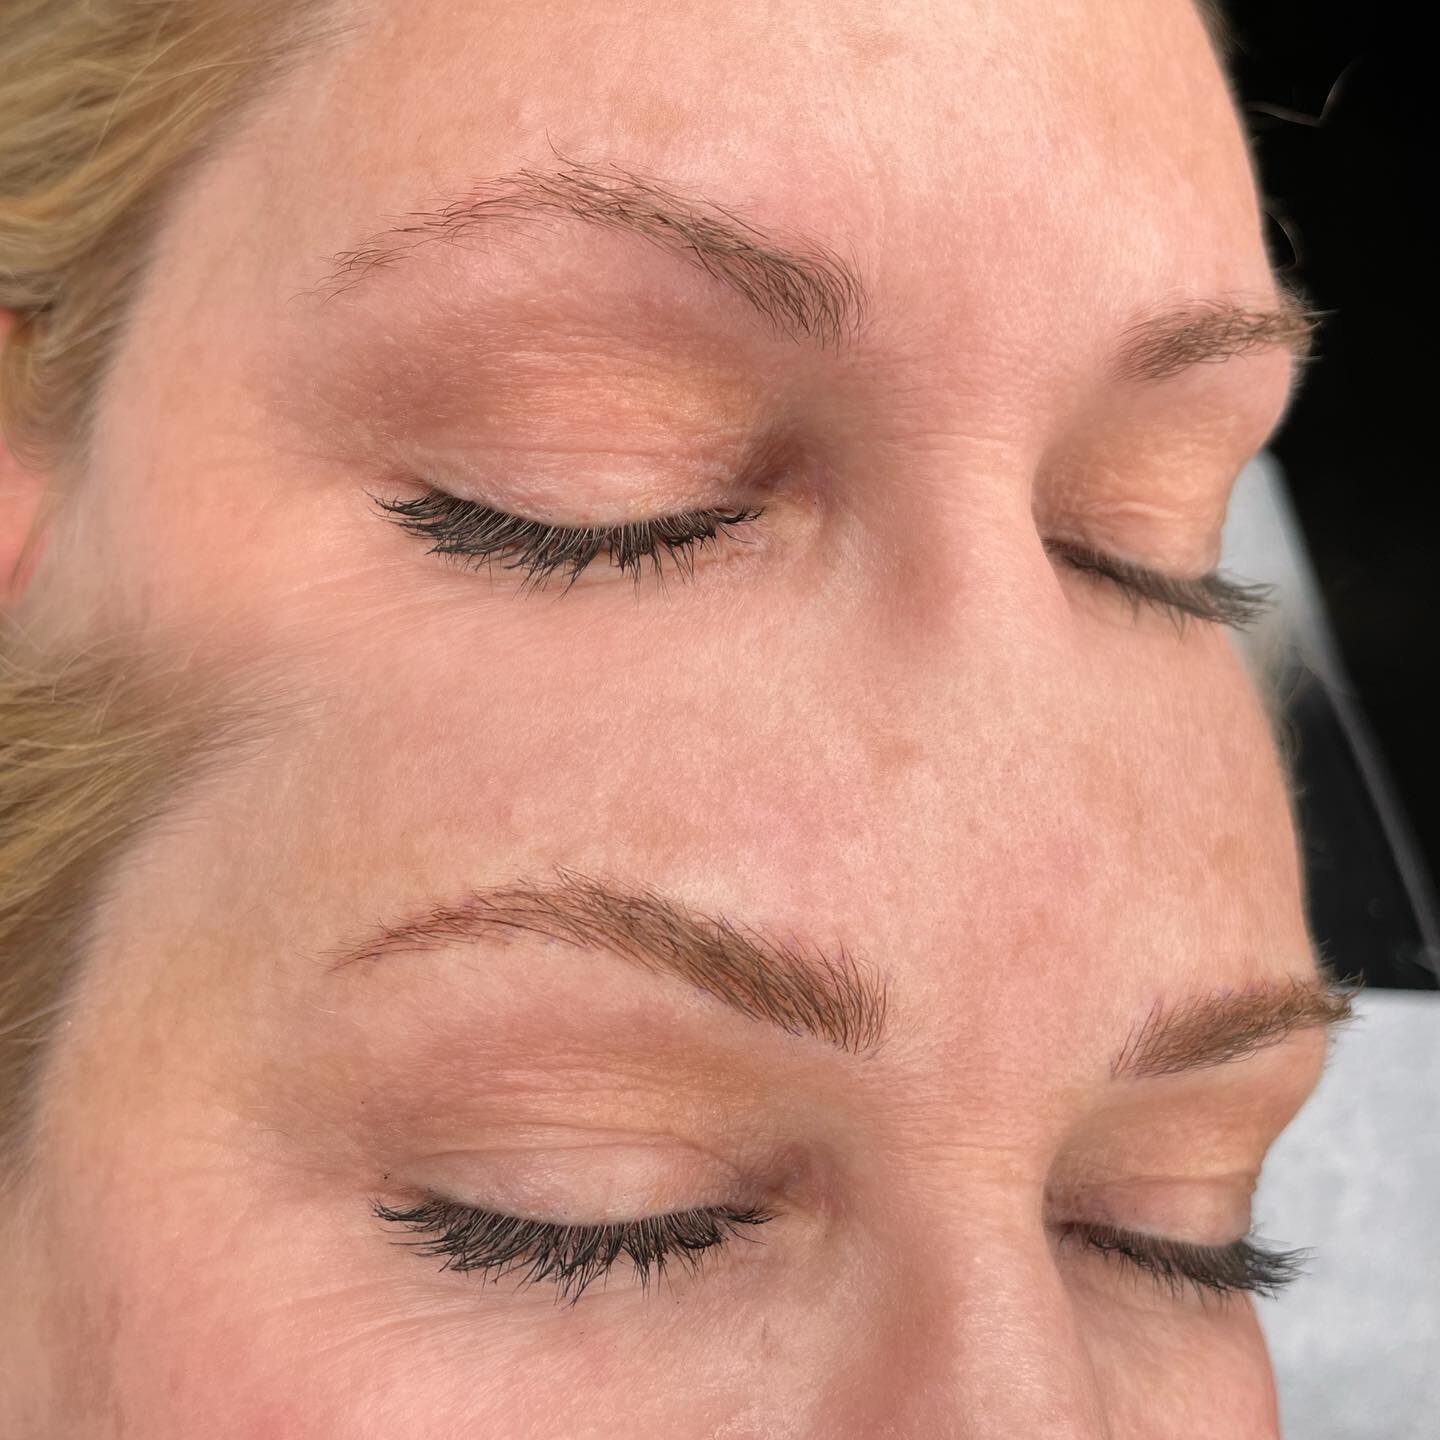 Naturally lifted and balanced ✨ First session of Microblading for this sweetie 💞🌹 #beforeandafter #losangelesmicroblading #cosmetictattoo #microbladinglosangeles #losangelestattoo